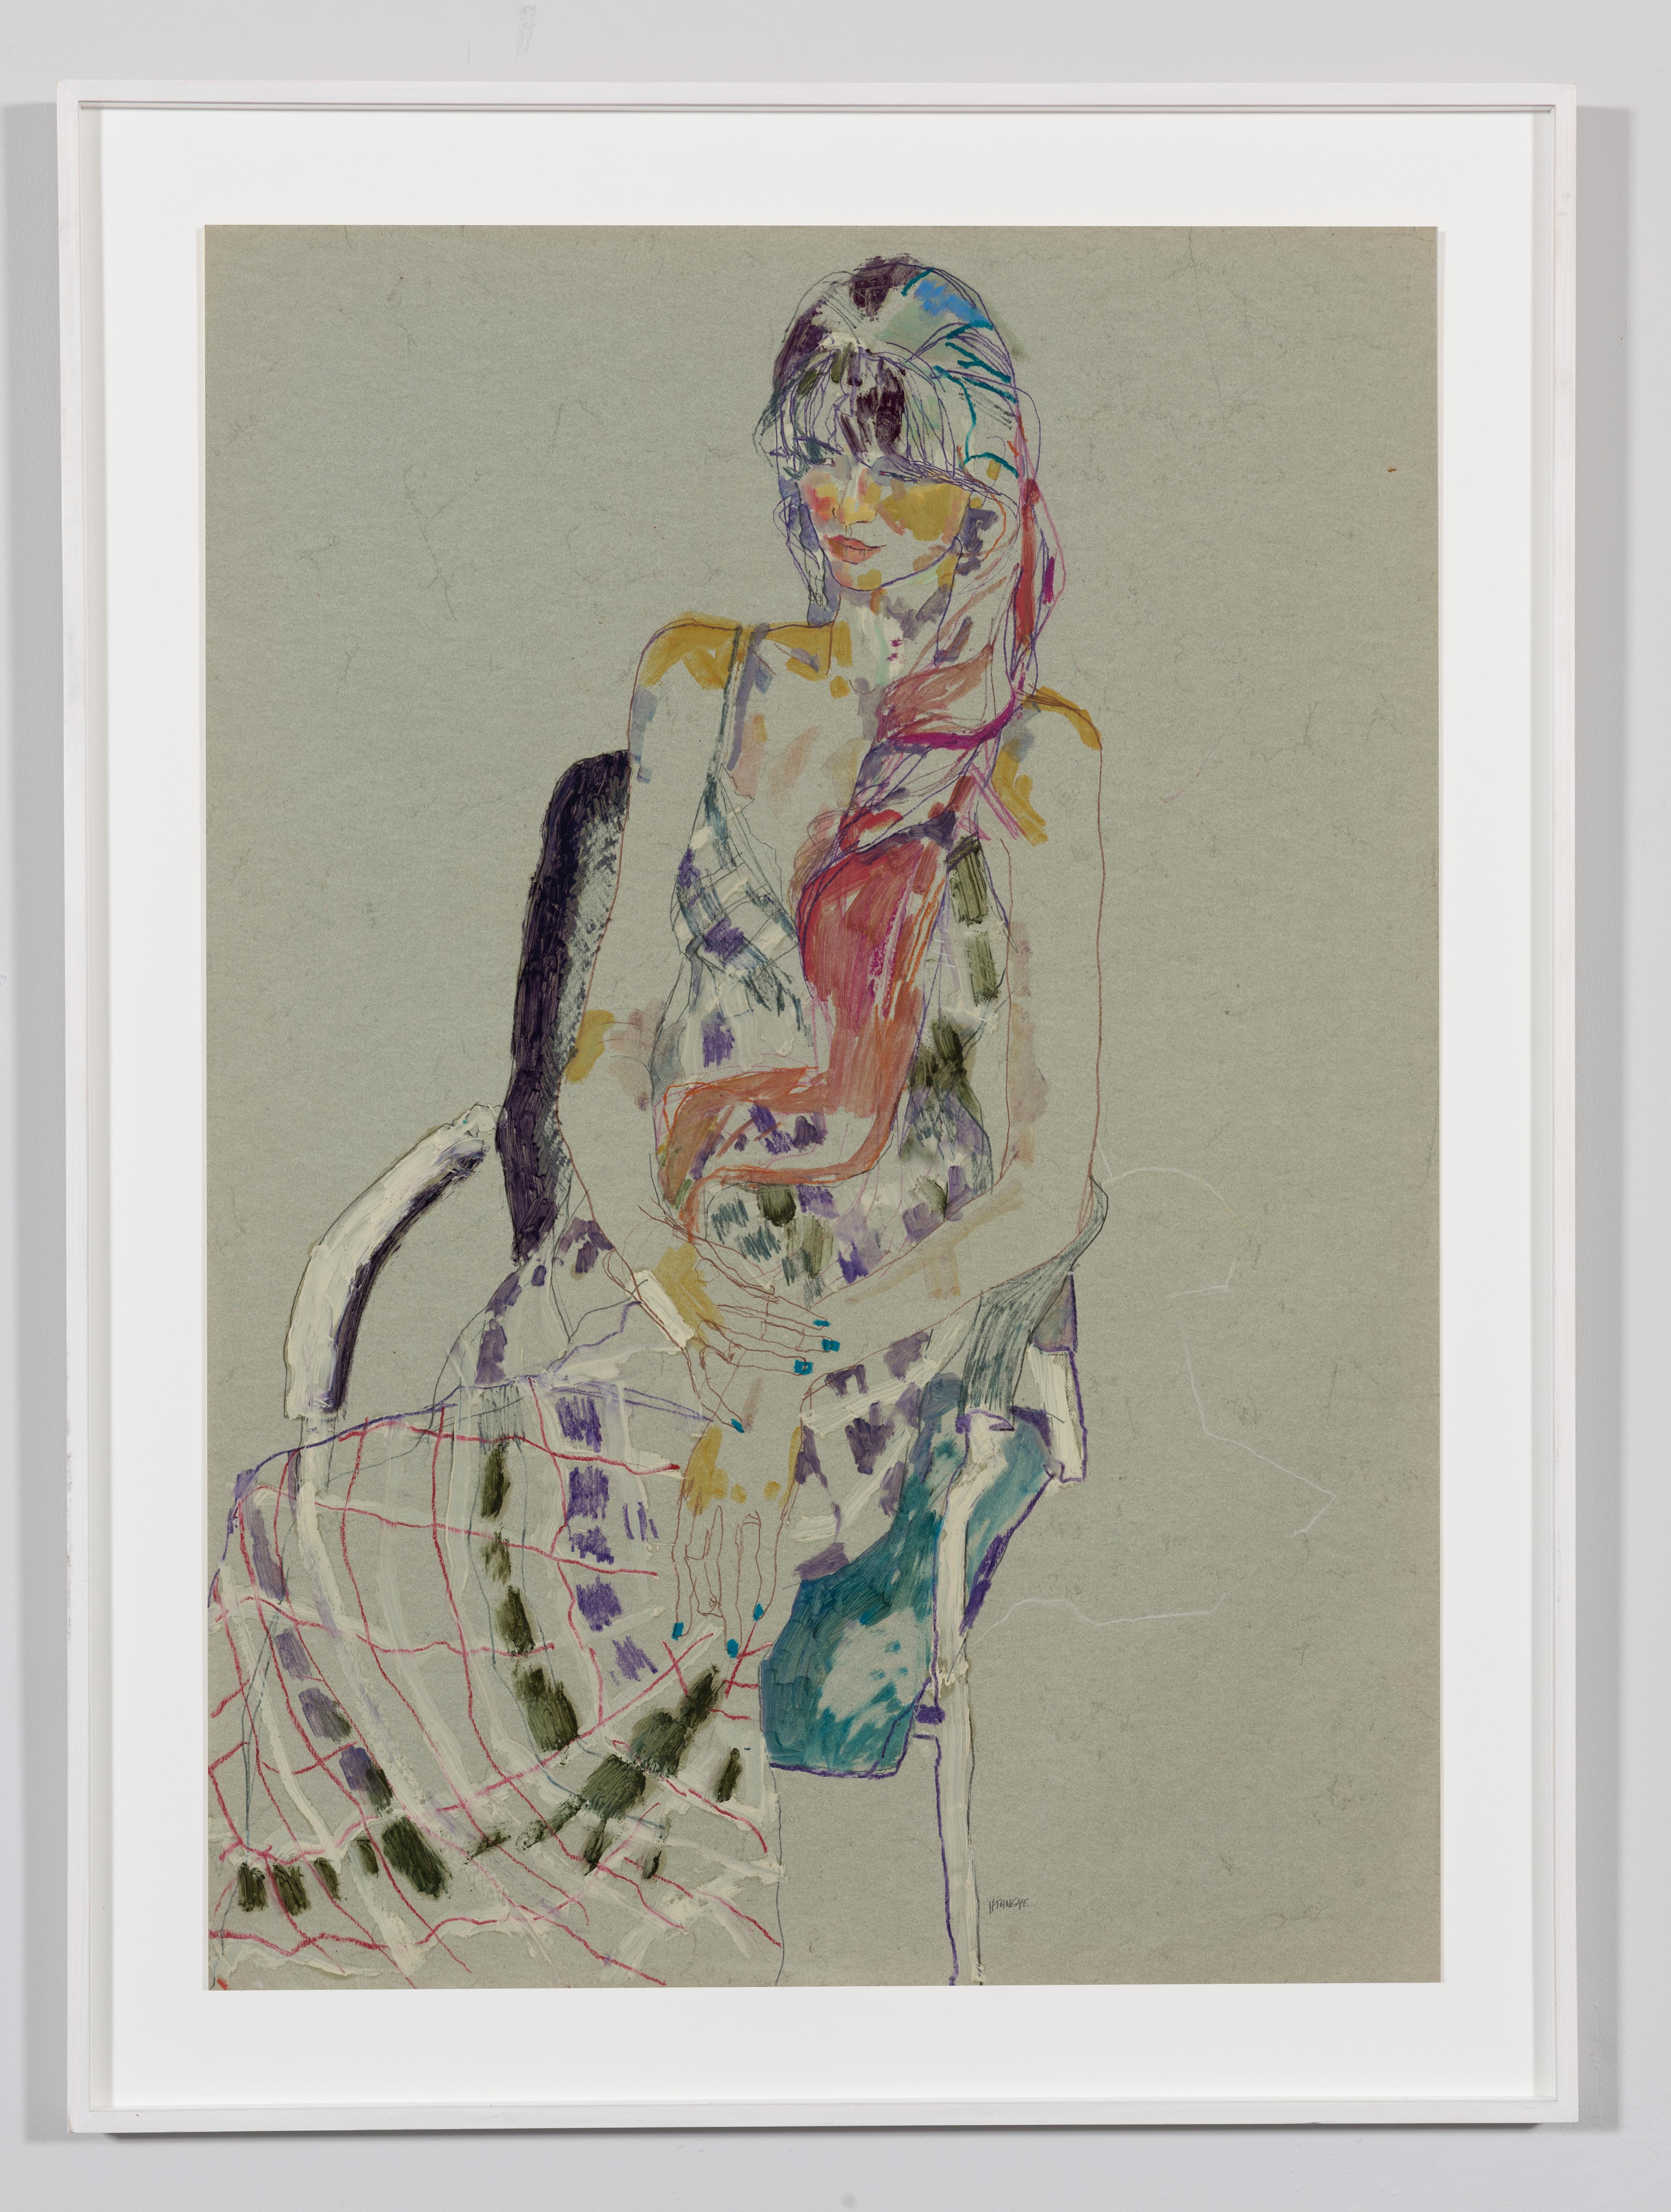 Moira C. (Sitting - Long Red Hair), Mixed media on grey parchment - Art by Howard Tangye